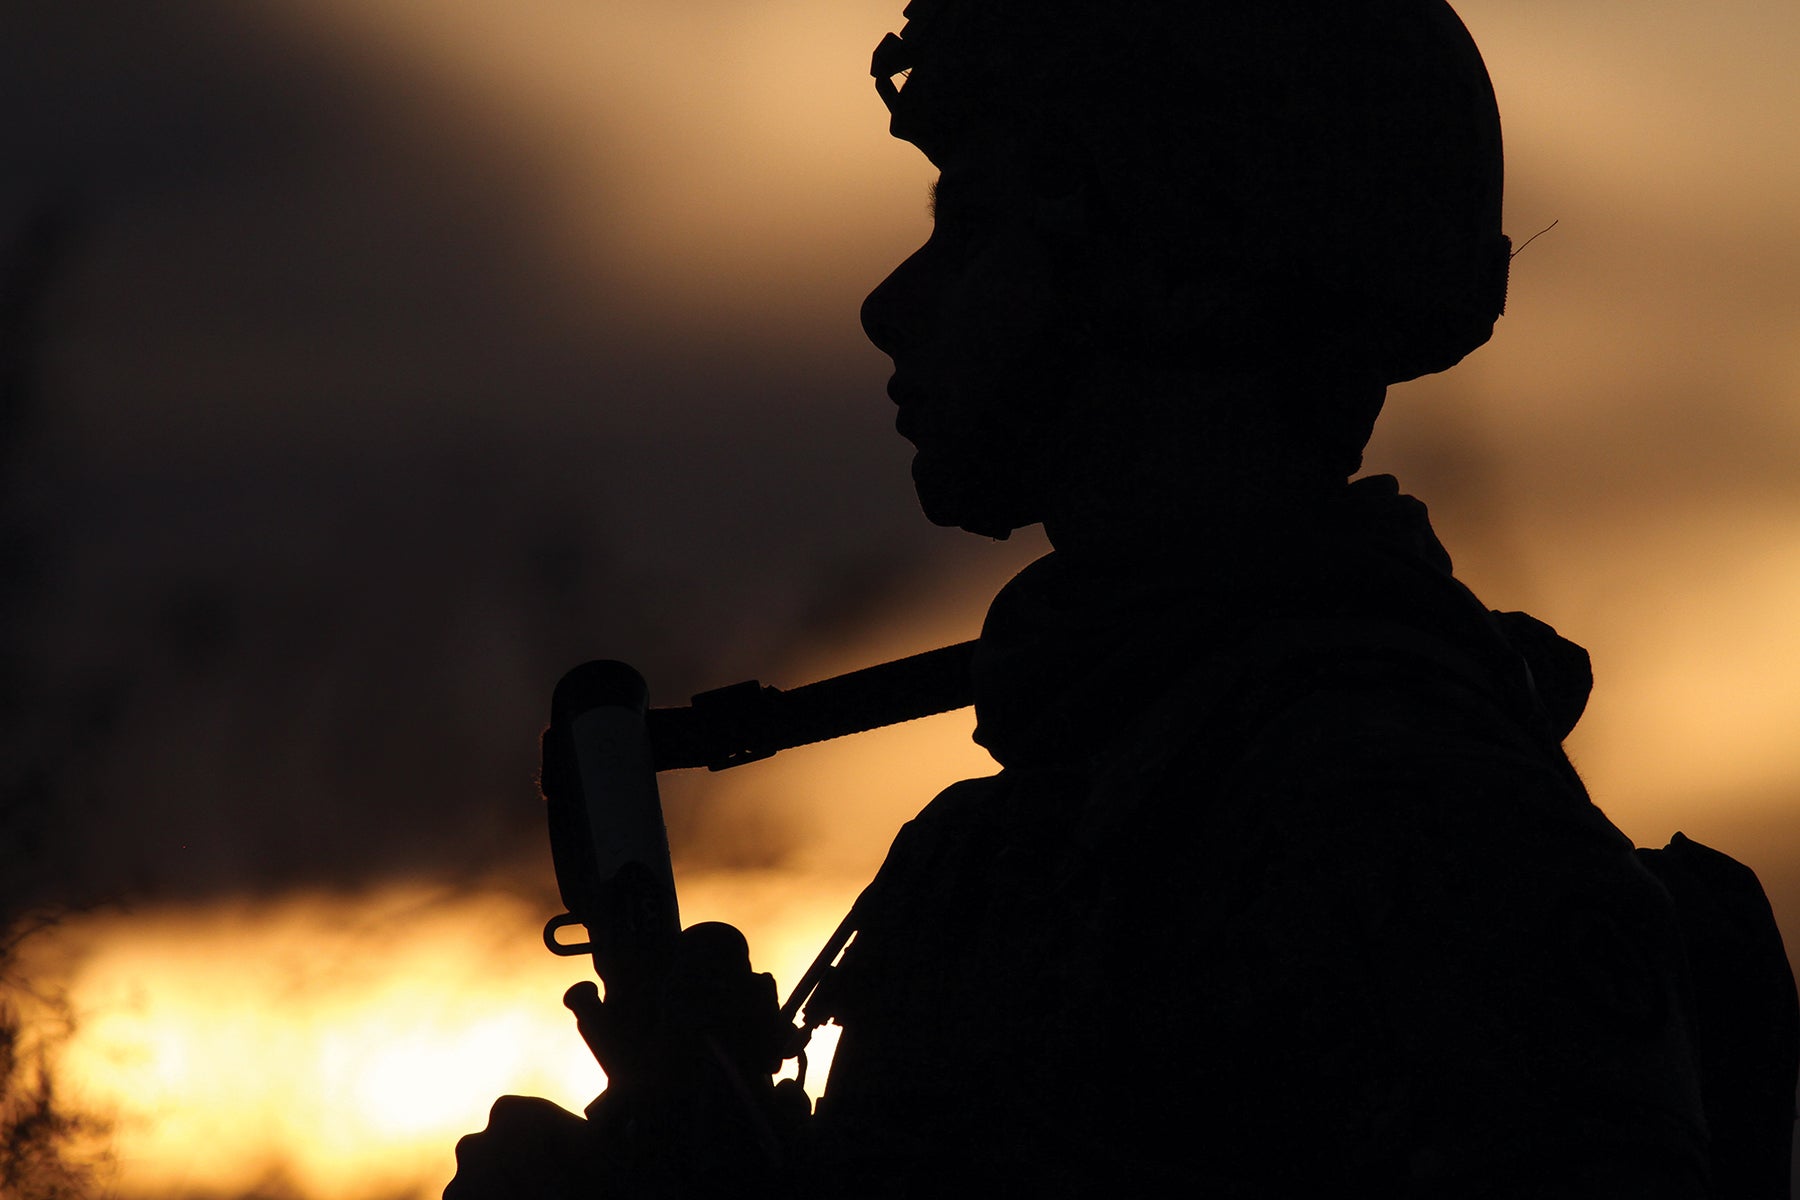 A New Jersey Army National Guard soldier appears in silhouette as the sun sets.